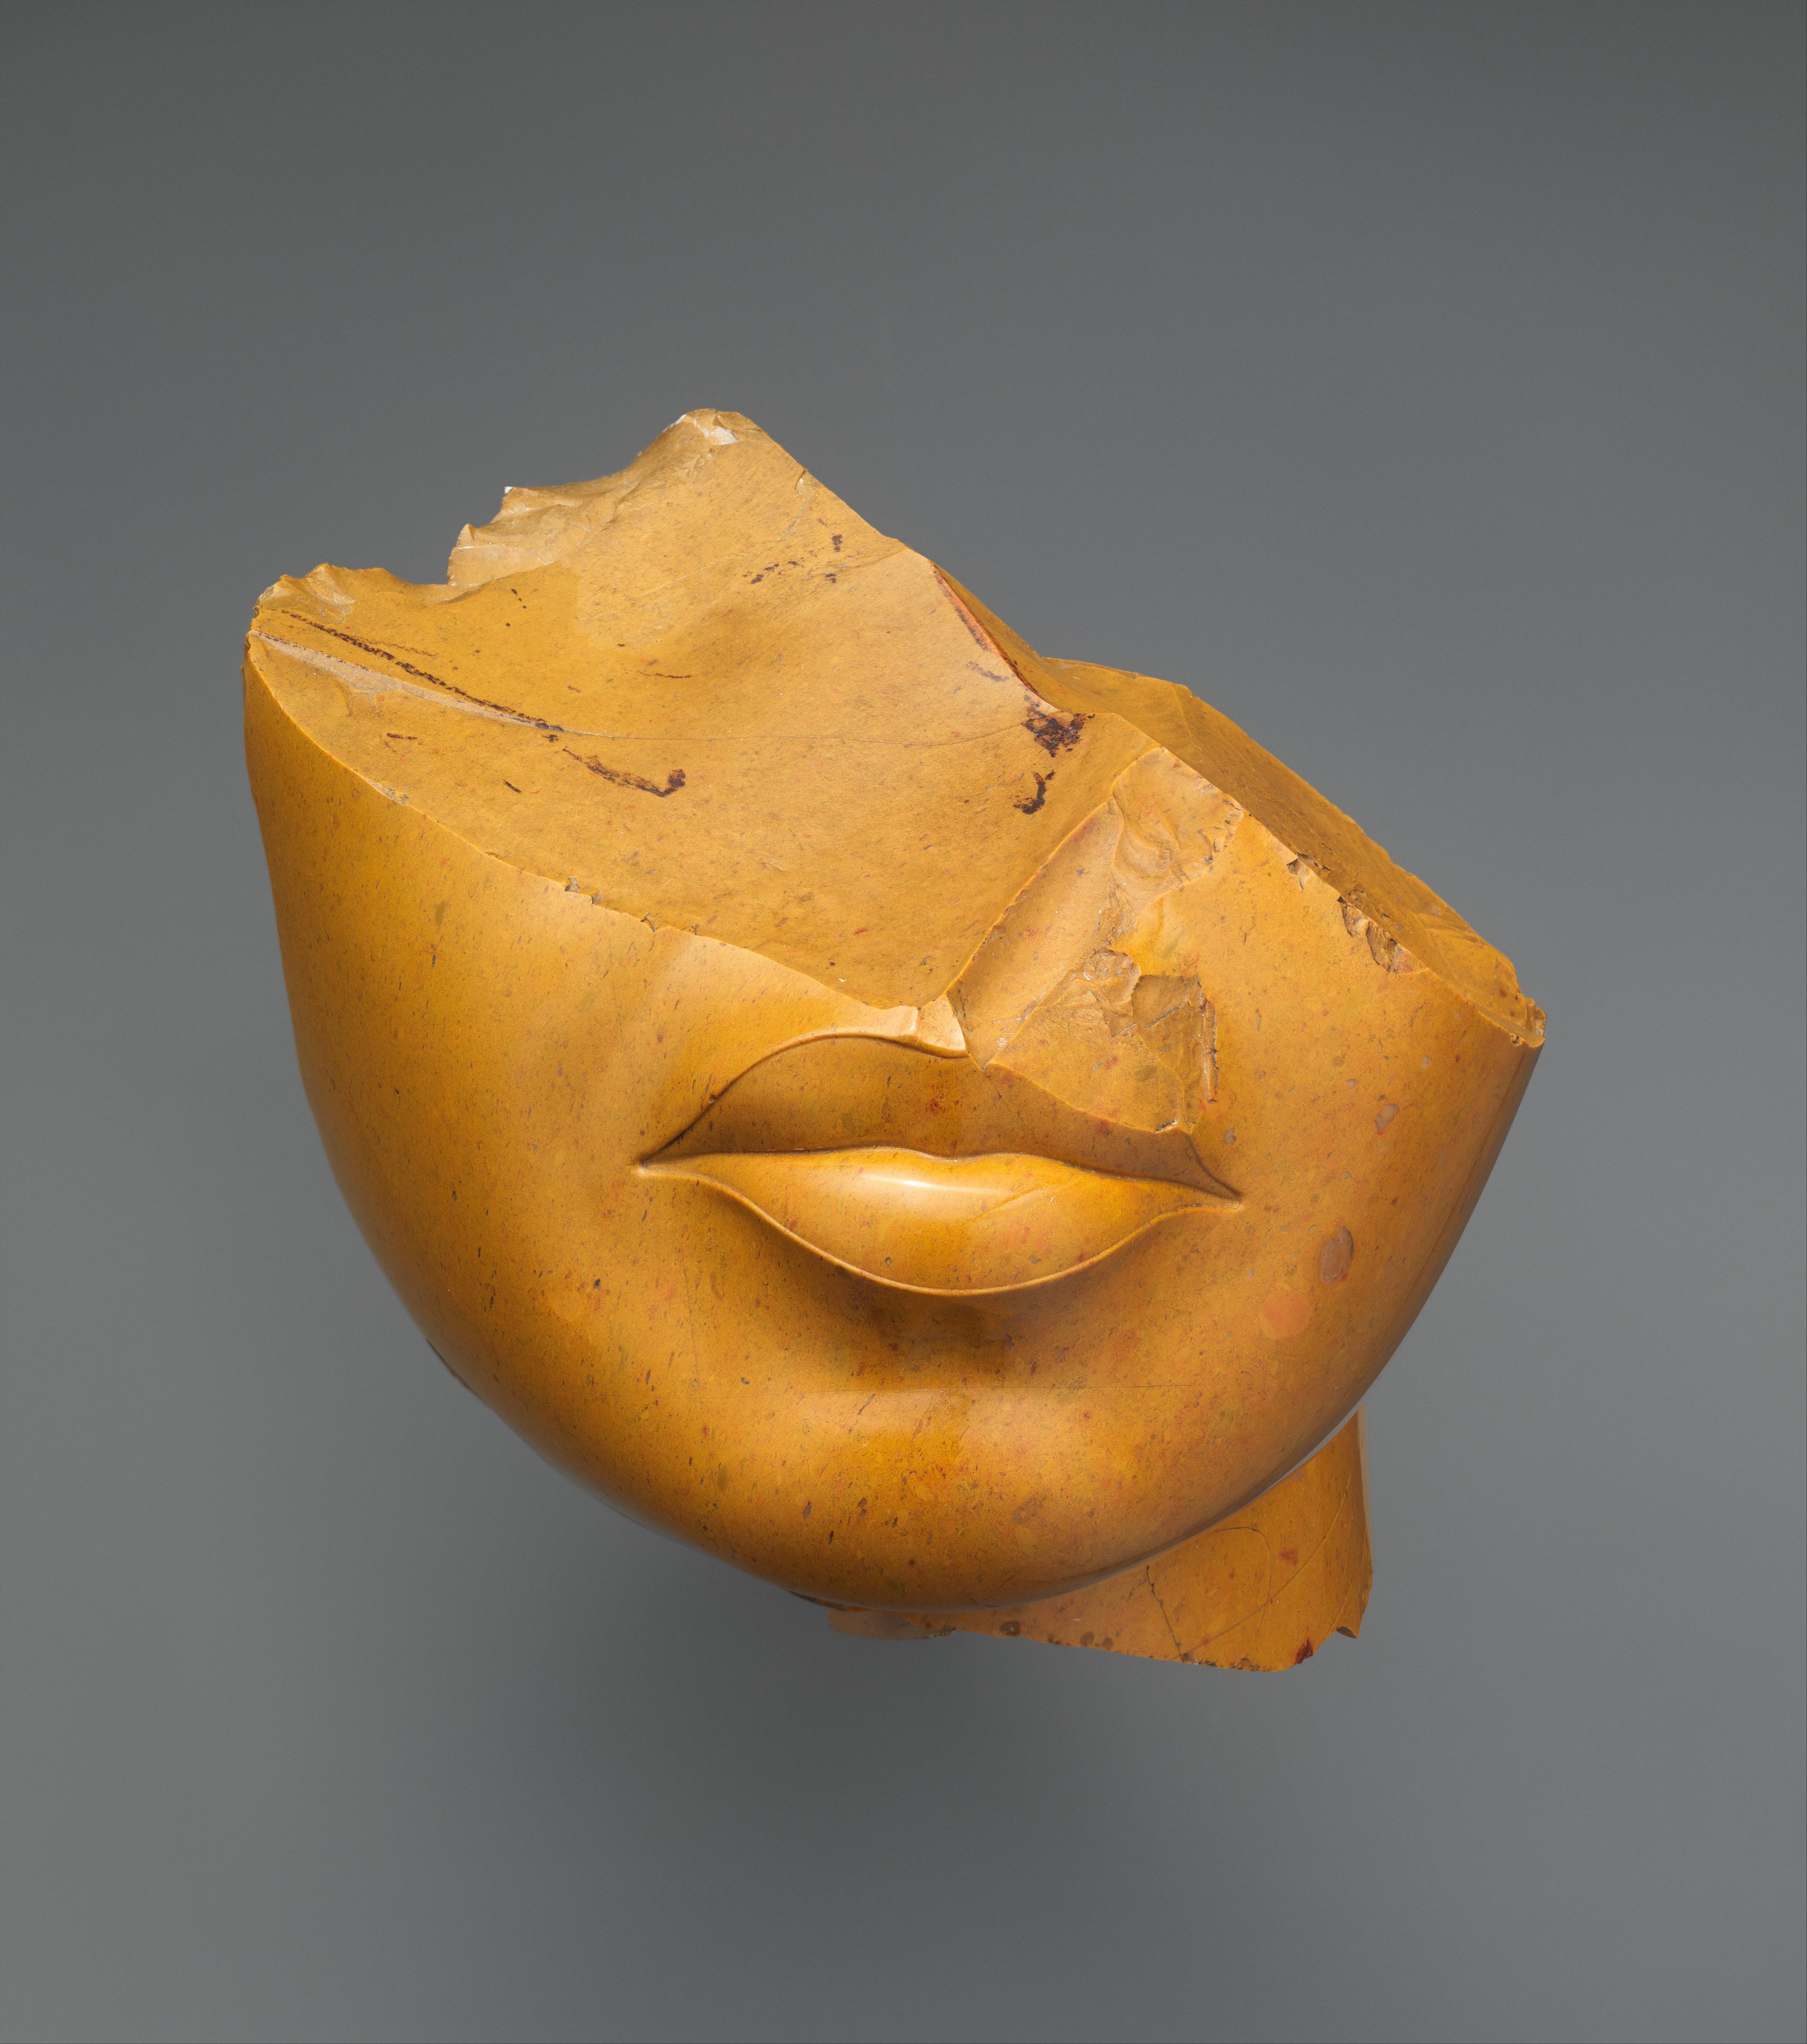 Fragment of a Queen's Face by Unknown Artist - ca. 1353–1336 B.C. - 13 x 12.5 x 12.5 cm Metropolitan Museum of Art